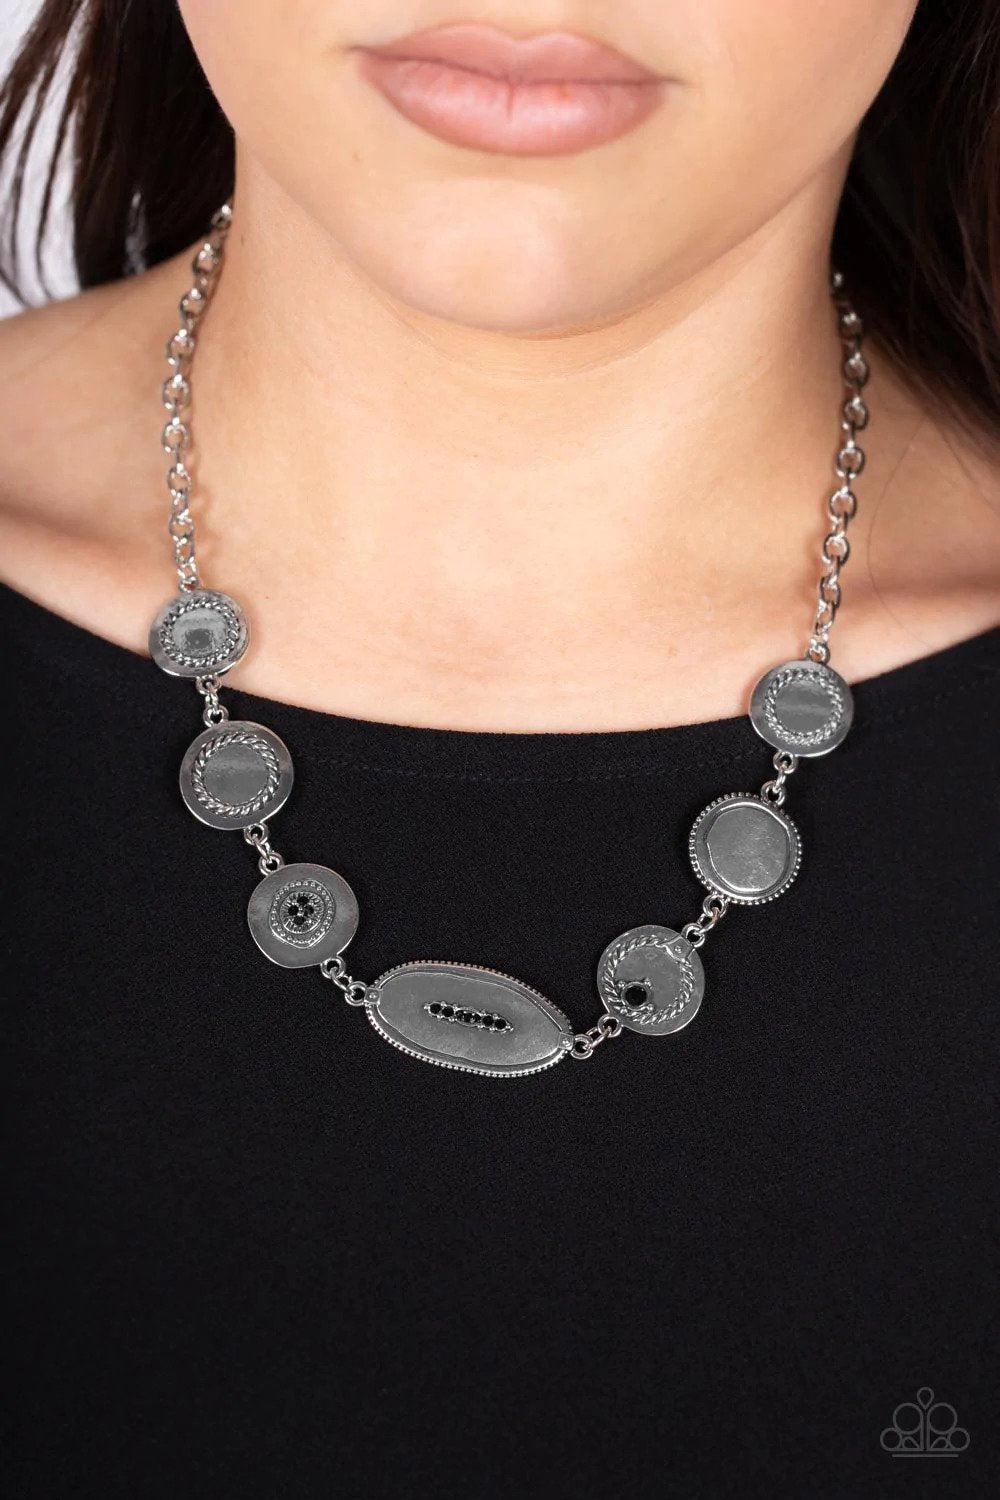 Uniquely Unconventional Black and Silver Necklace - Paparazzi Accessories- lightbox - CarasShop.com - $5 Jewelry by Cara Jewels